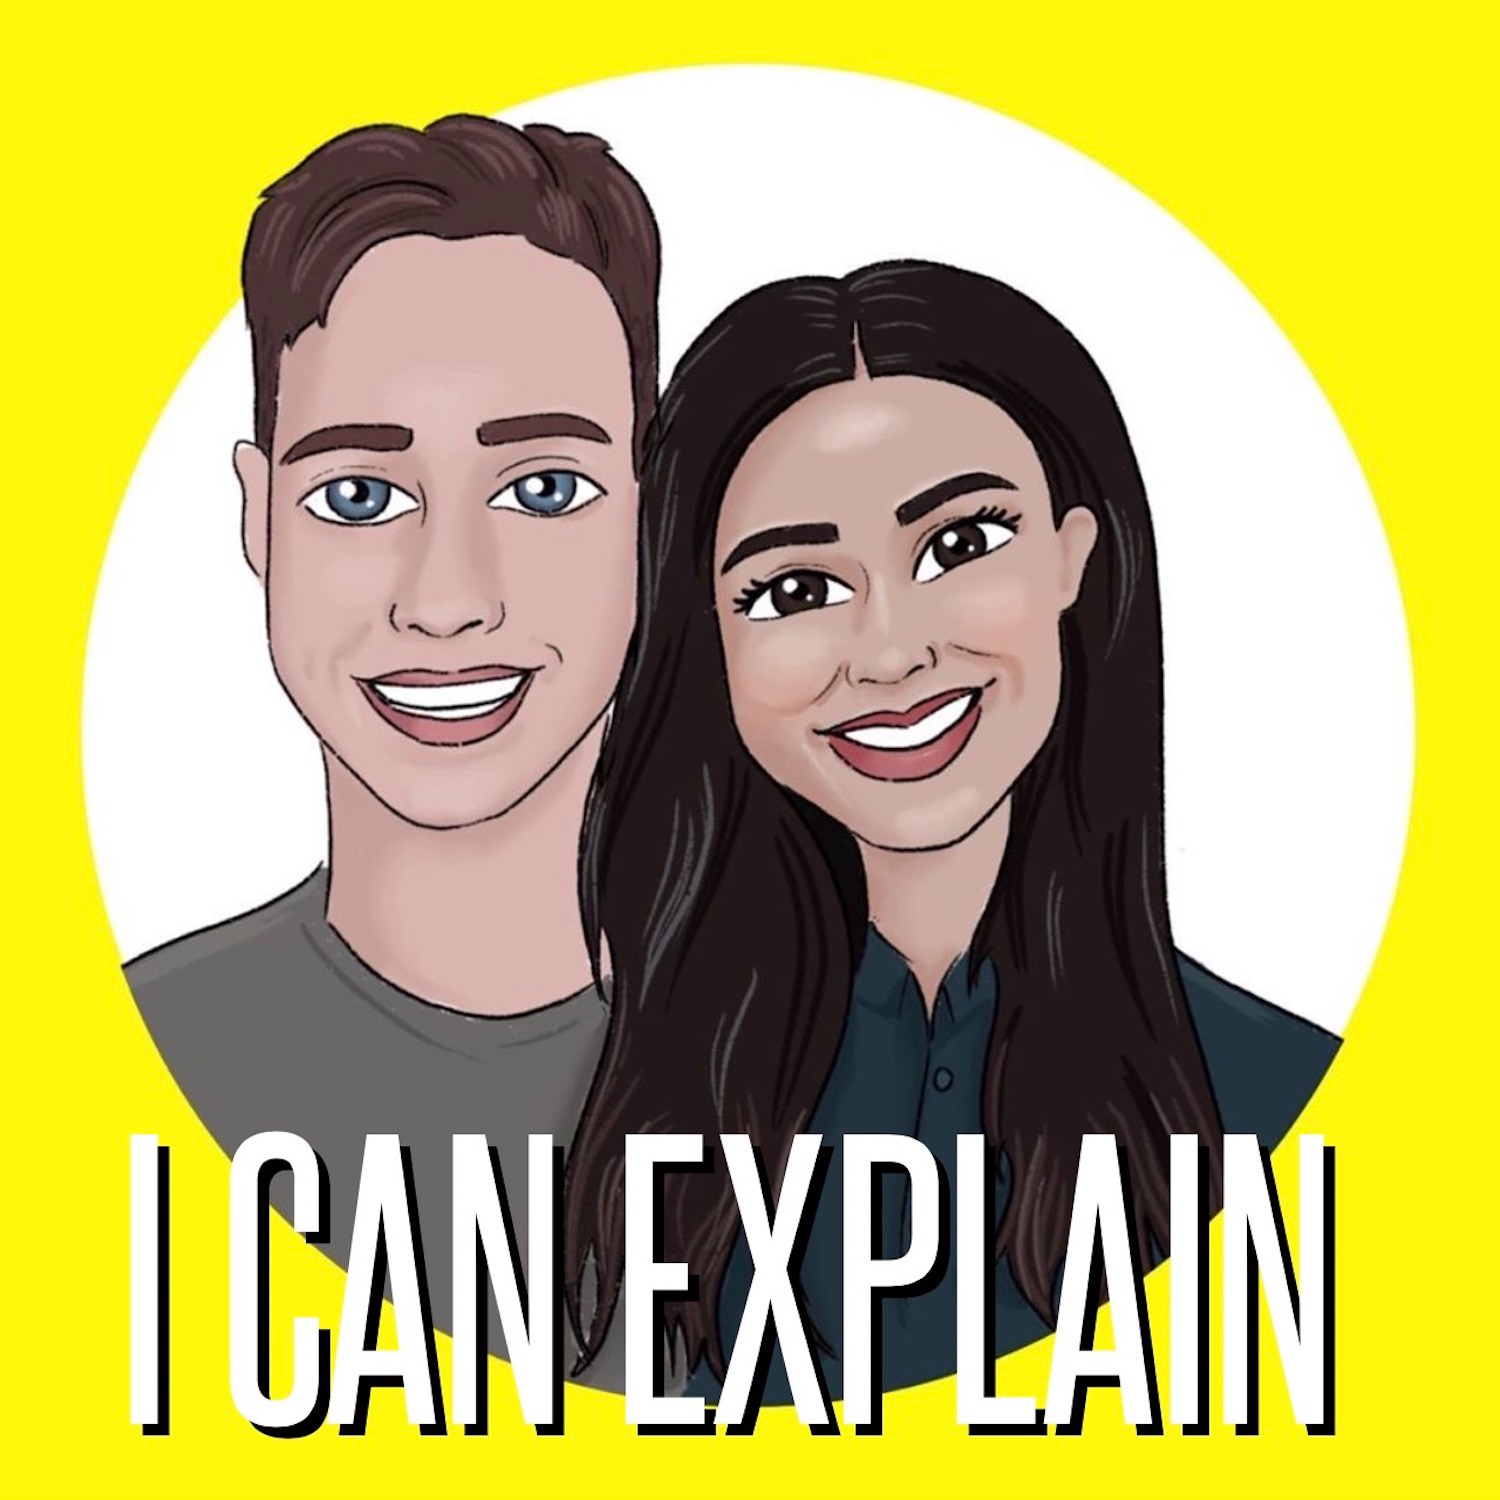 Stealing | I Can Explain Podcast EP.198